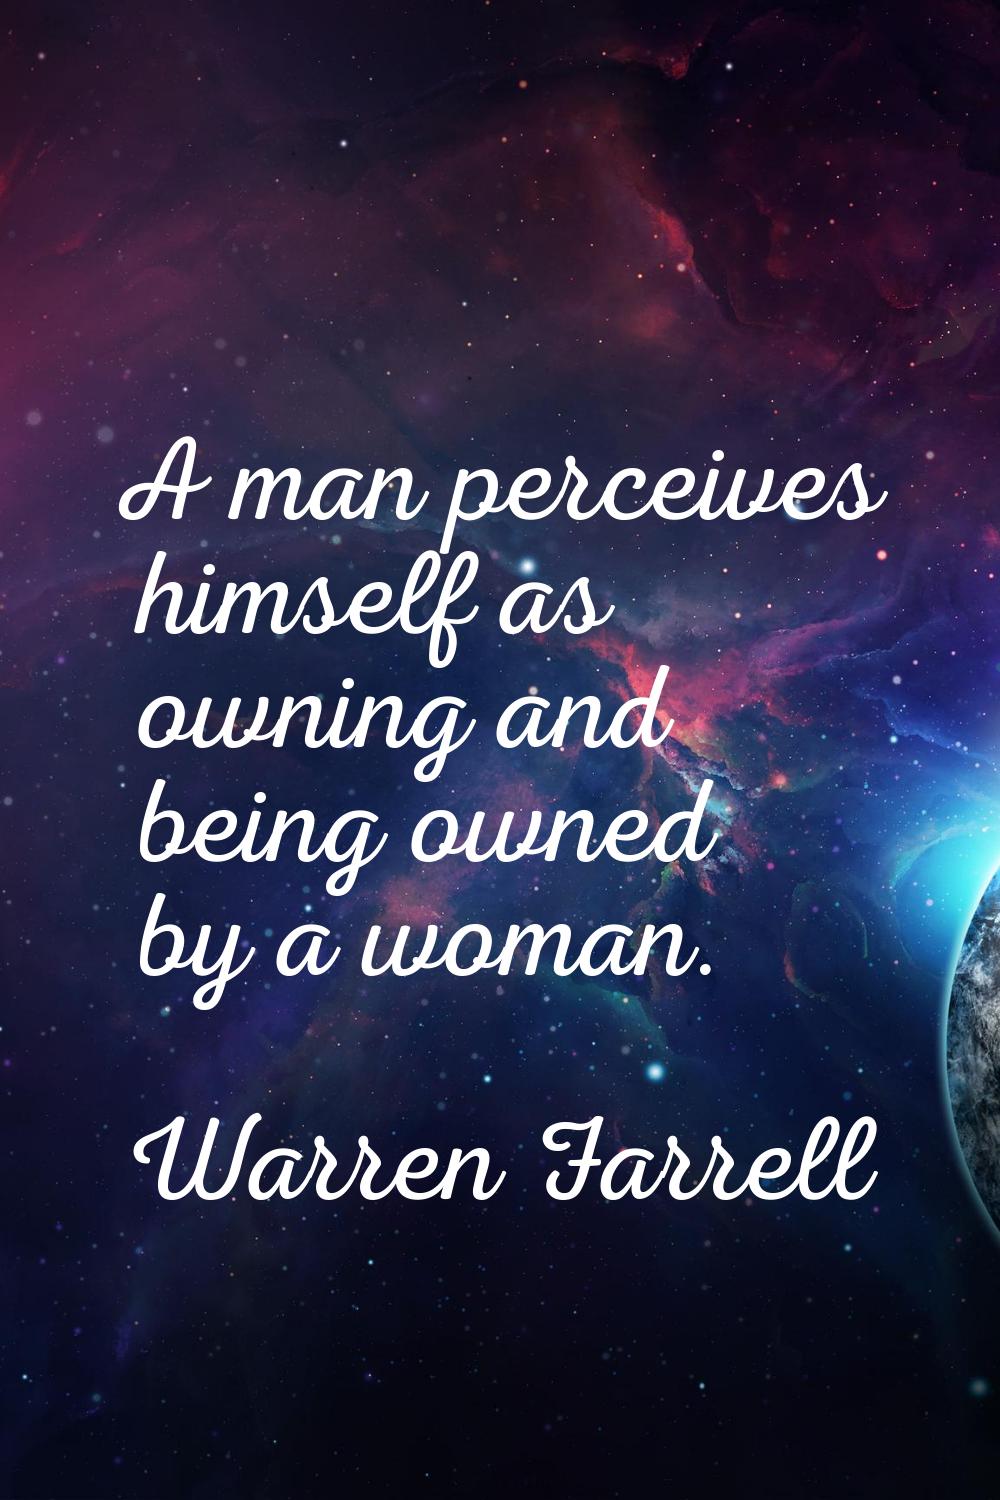 A man perceives himself as owning and being owned by a woman.